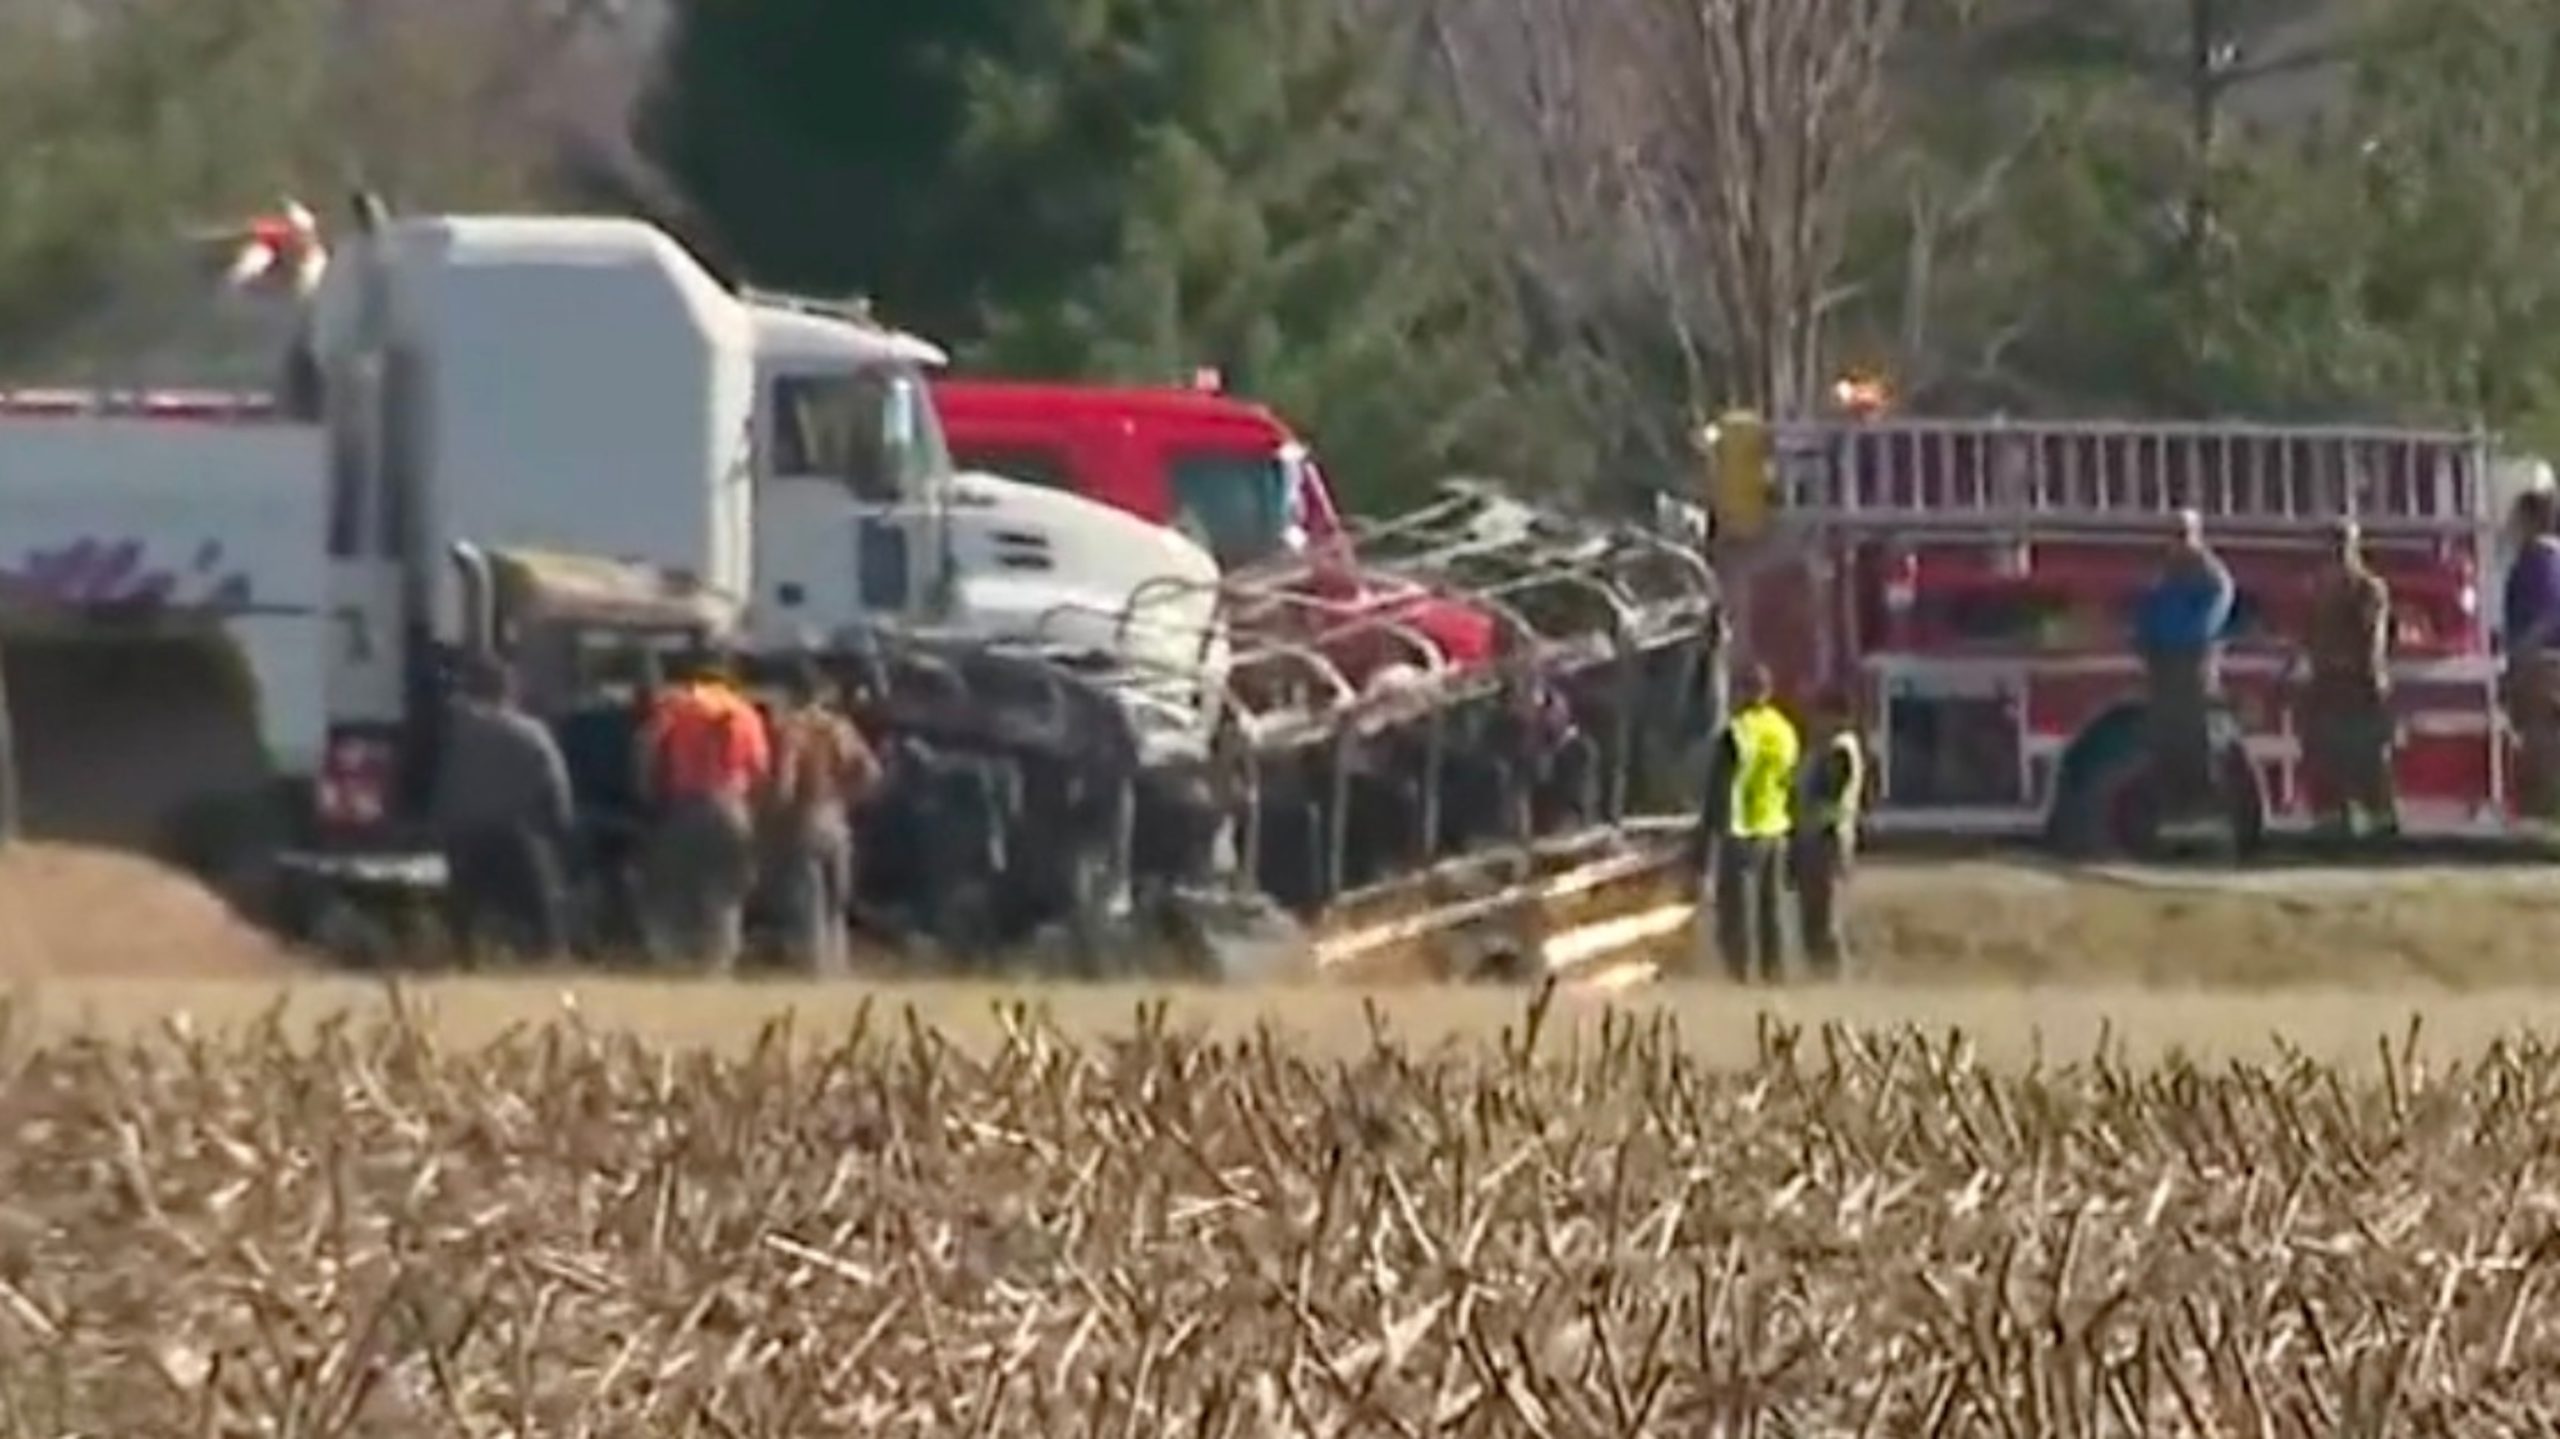 Police confirm 5 fatalities in Illinois school bus and semi-truck collision